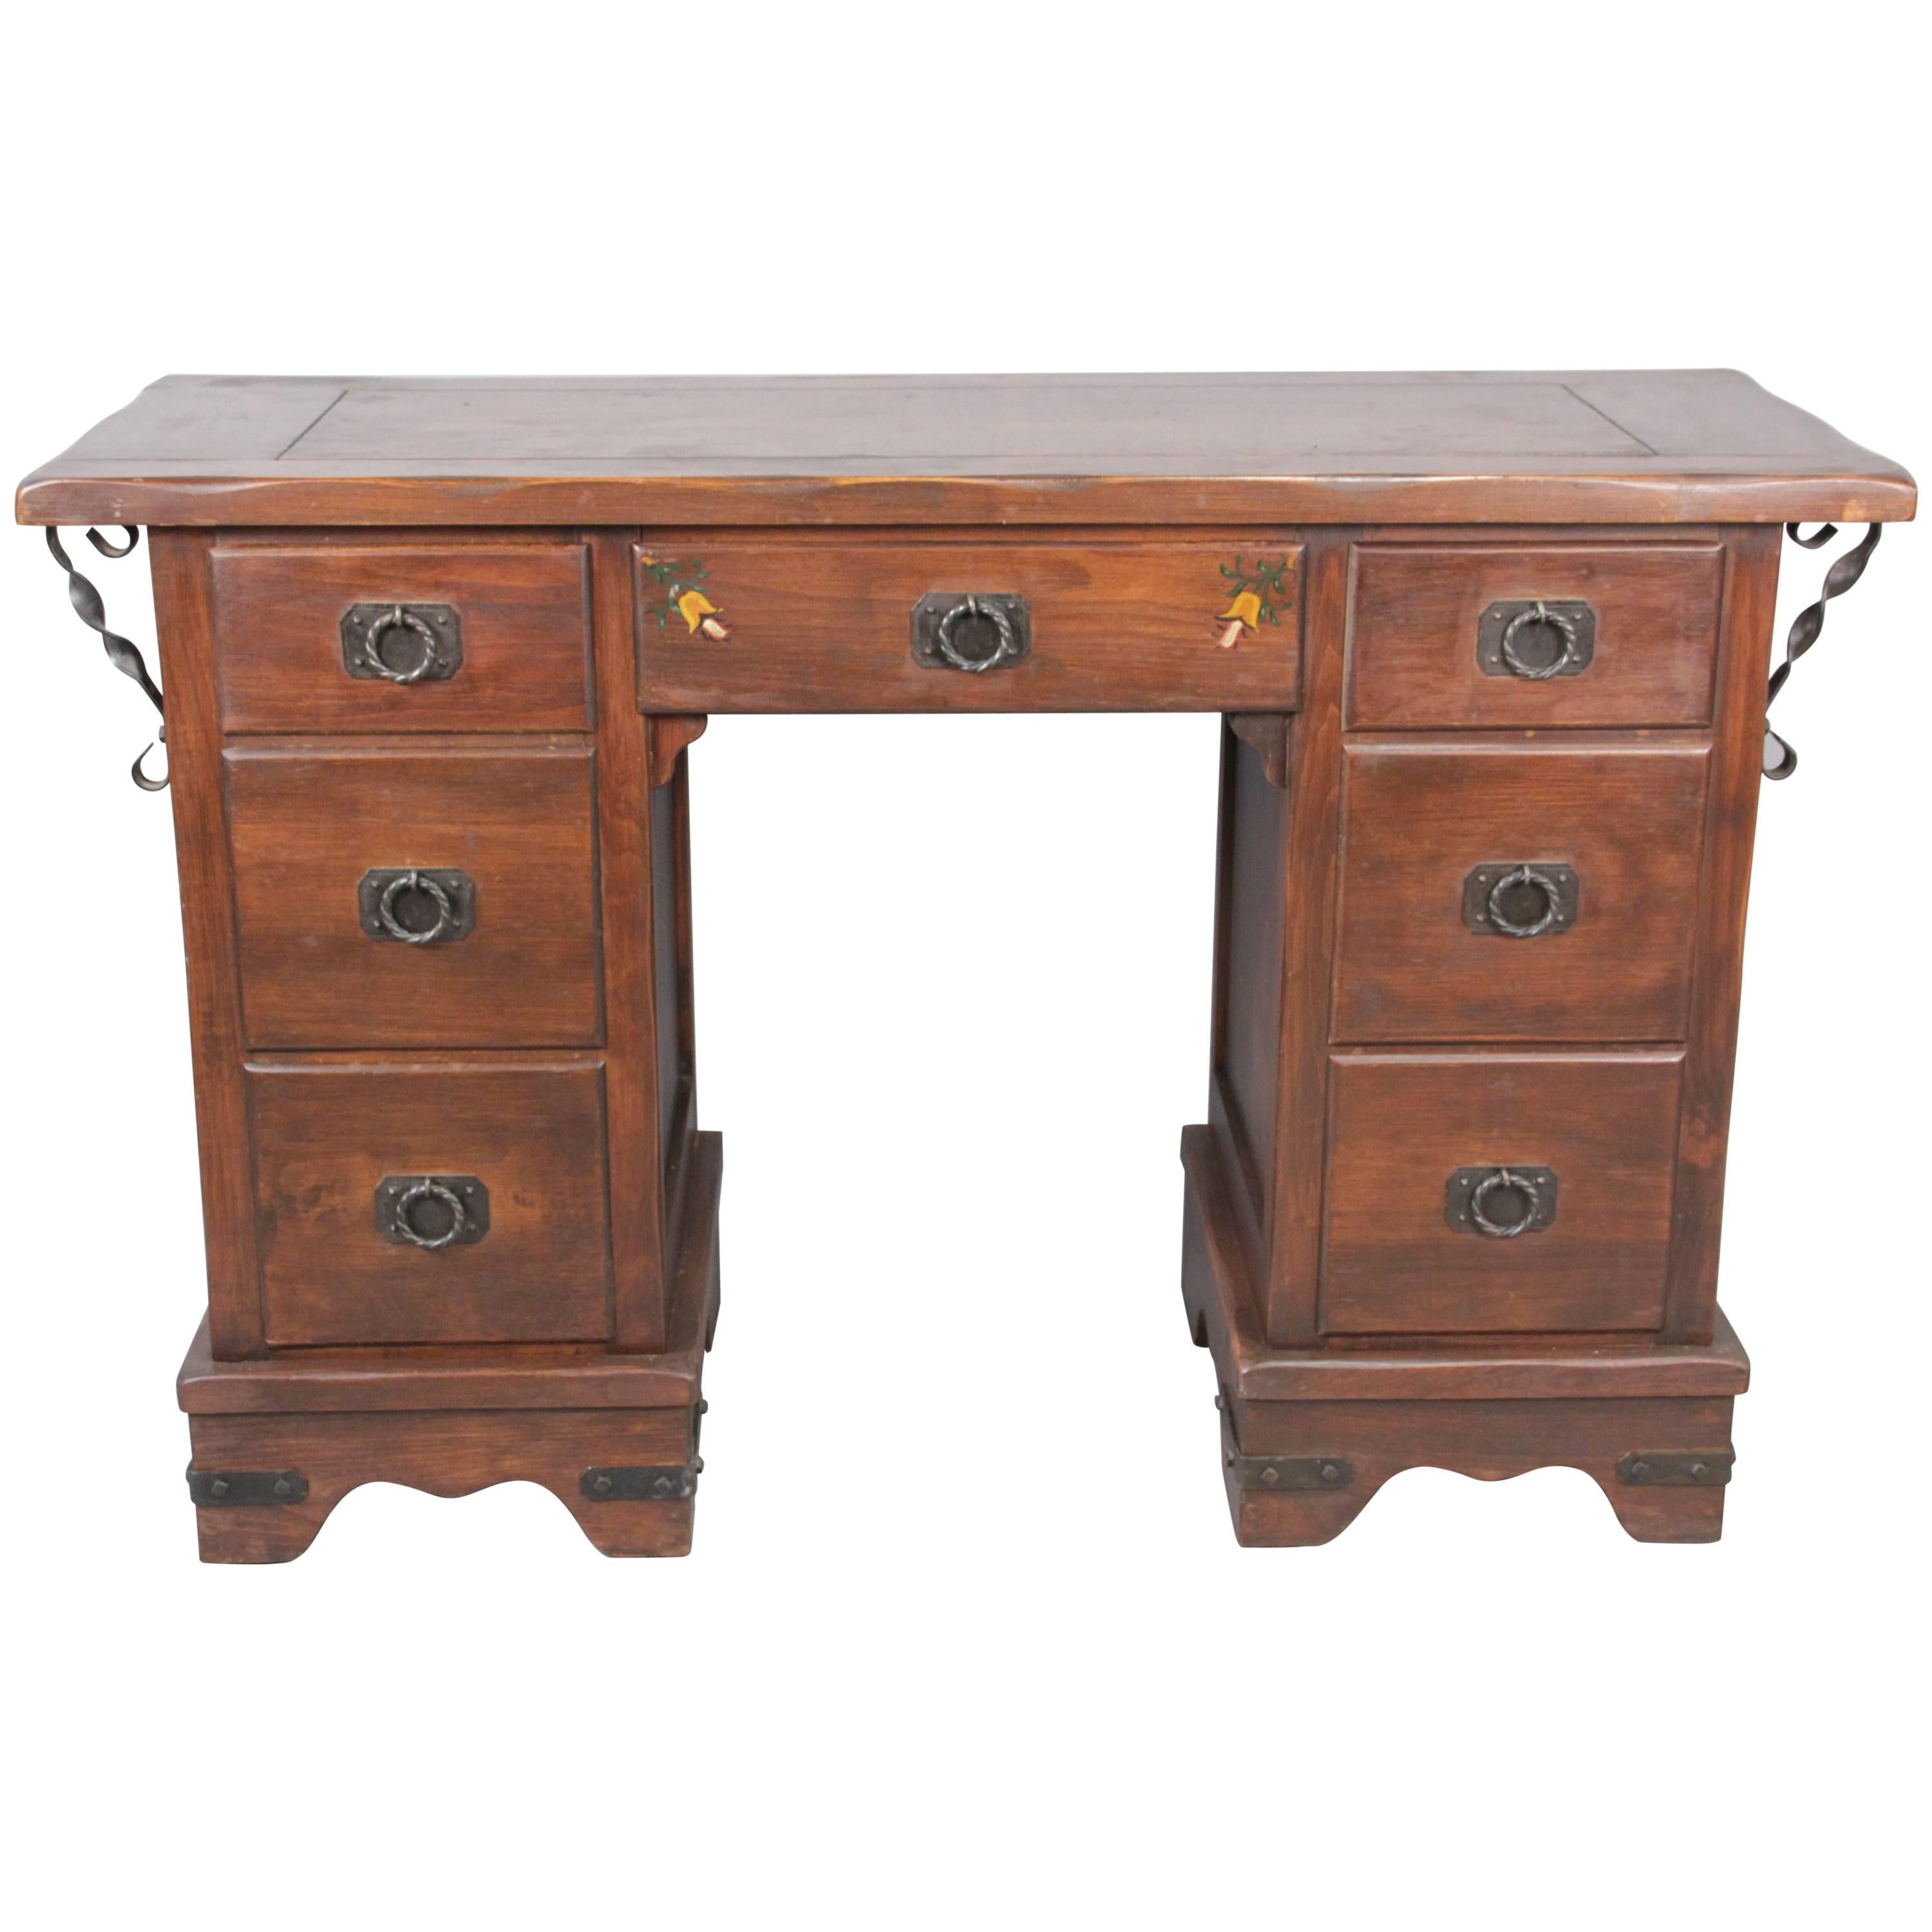 1920s Early California Desk from the "Barcelona" Line